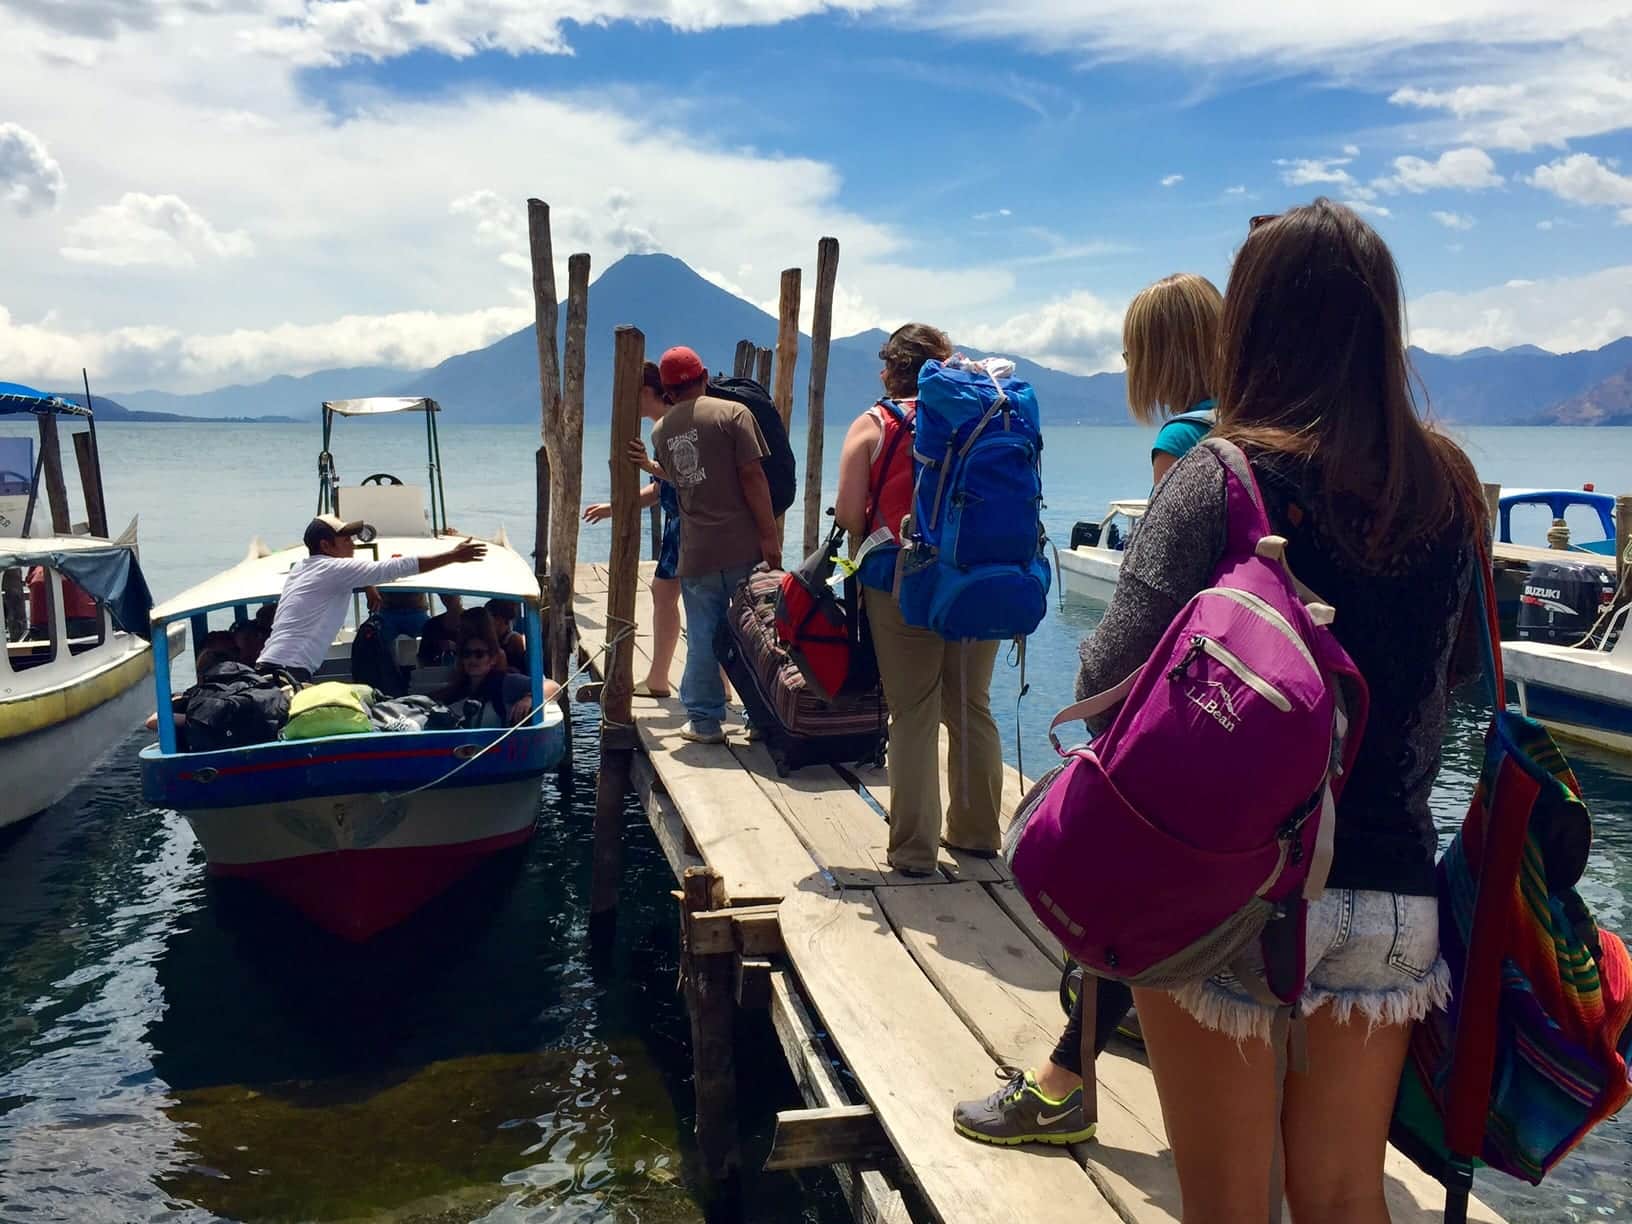 A group of travelers standing on a narrow dock as men pile their backpacks onto a small boat.